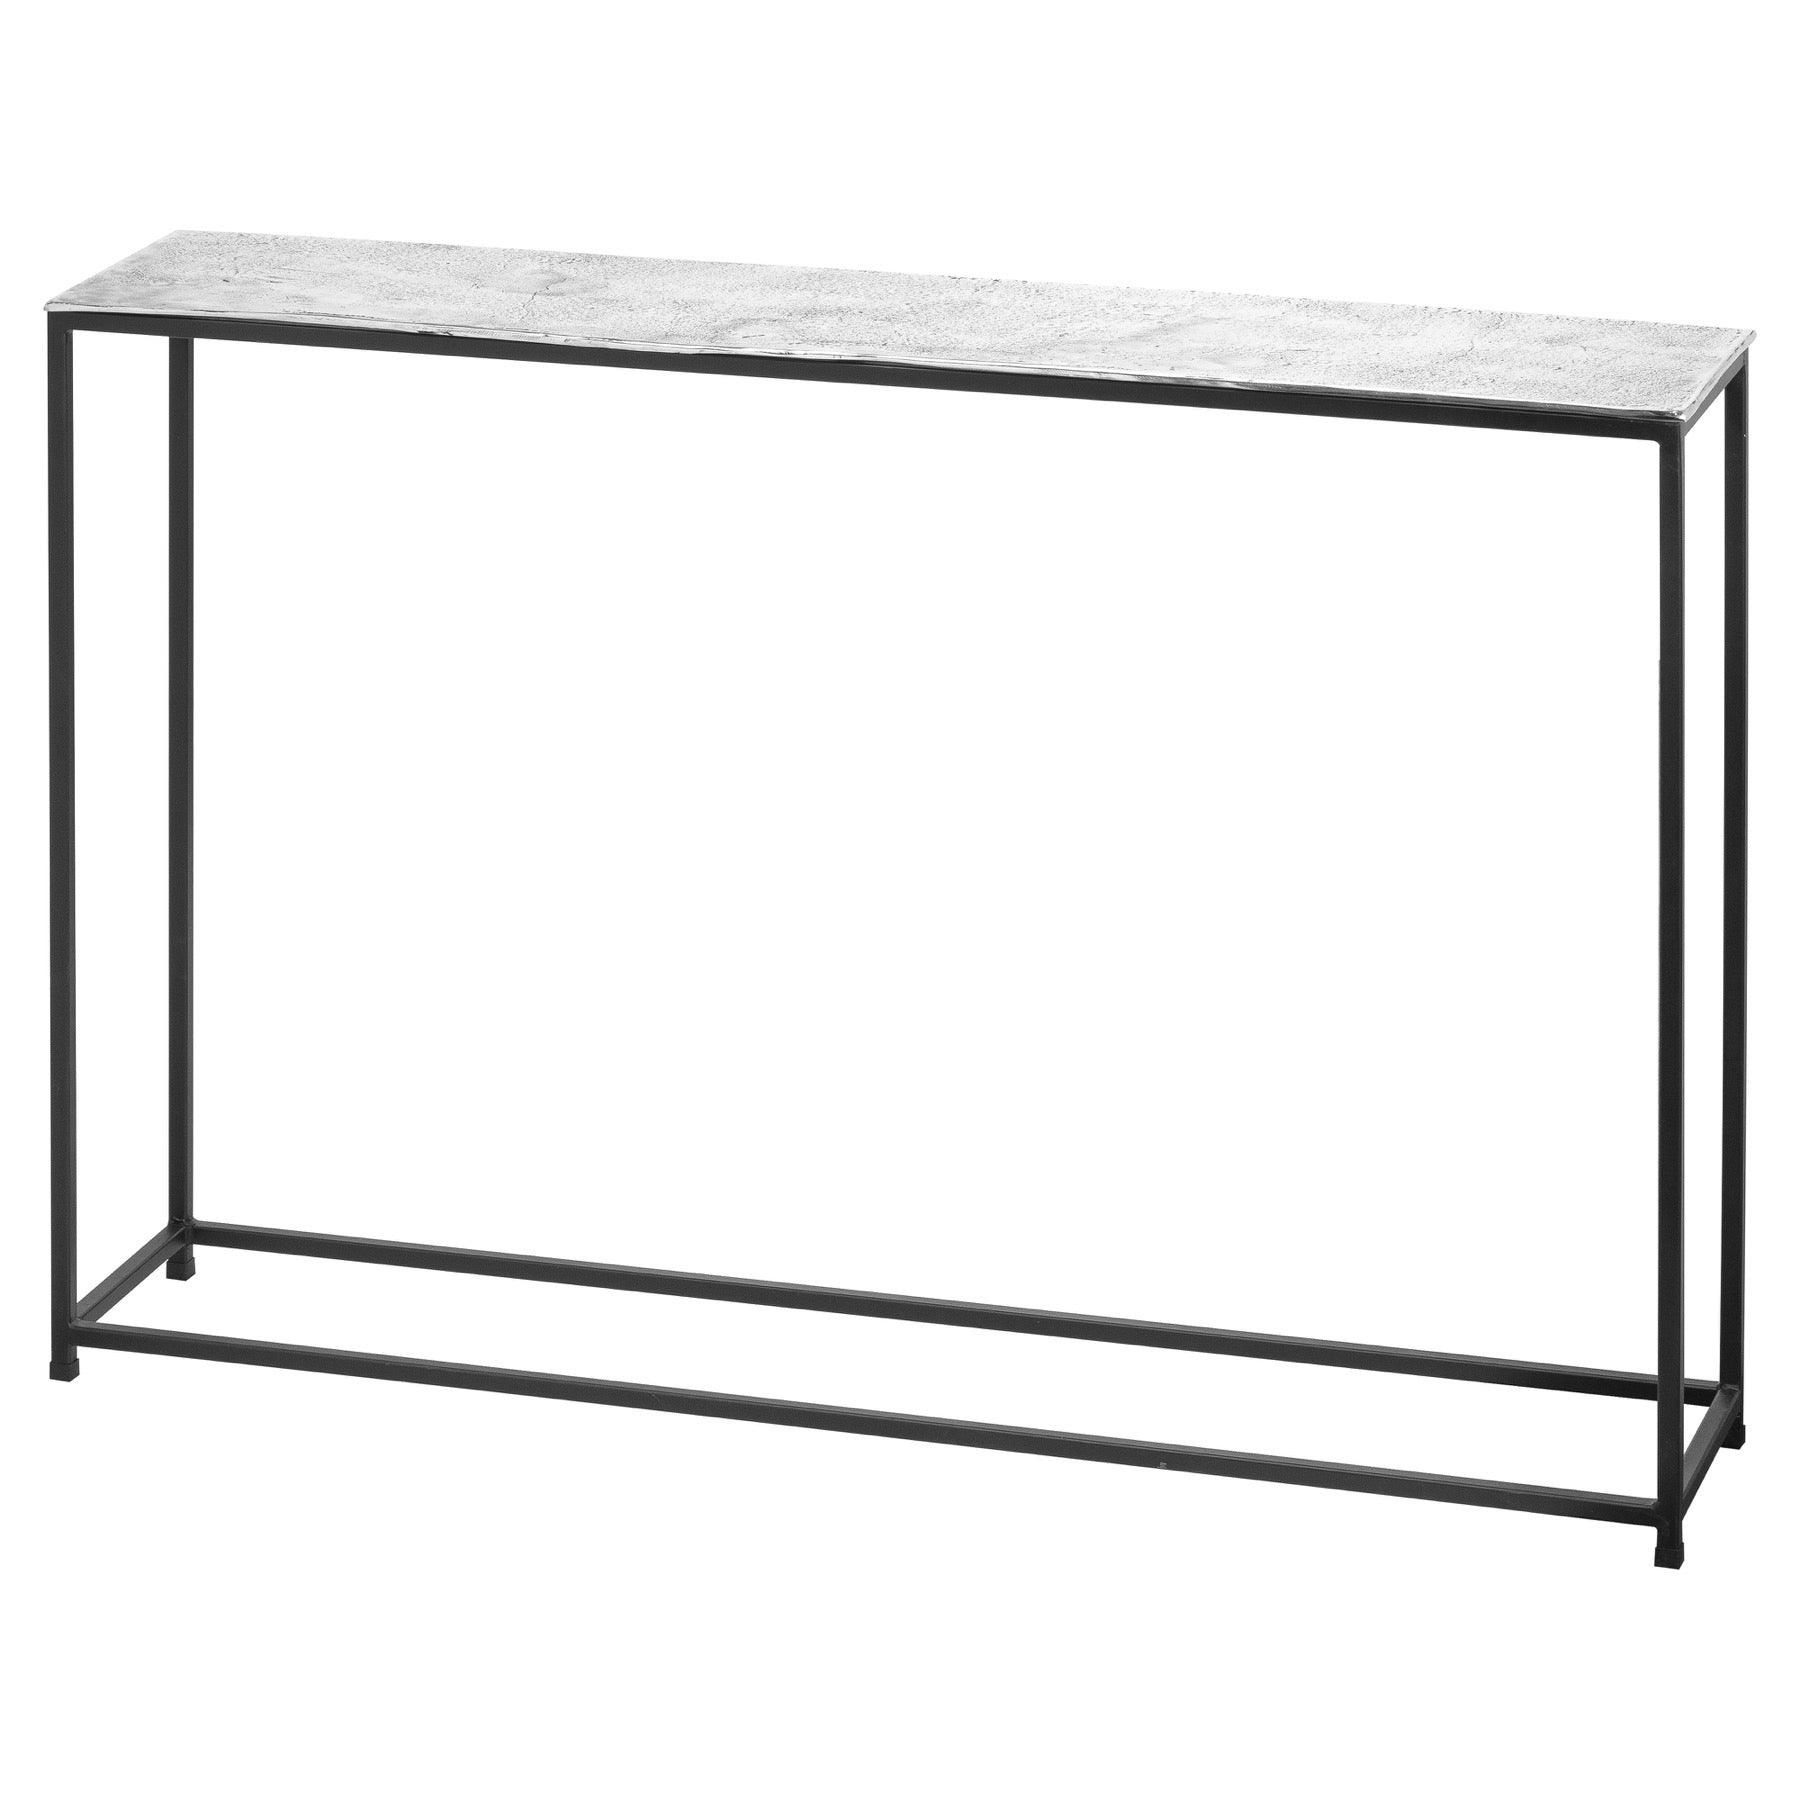 View Farrah Collection Silver Console Table information